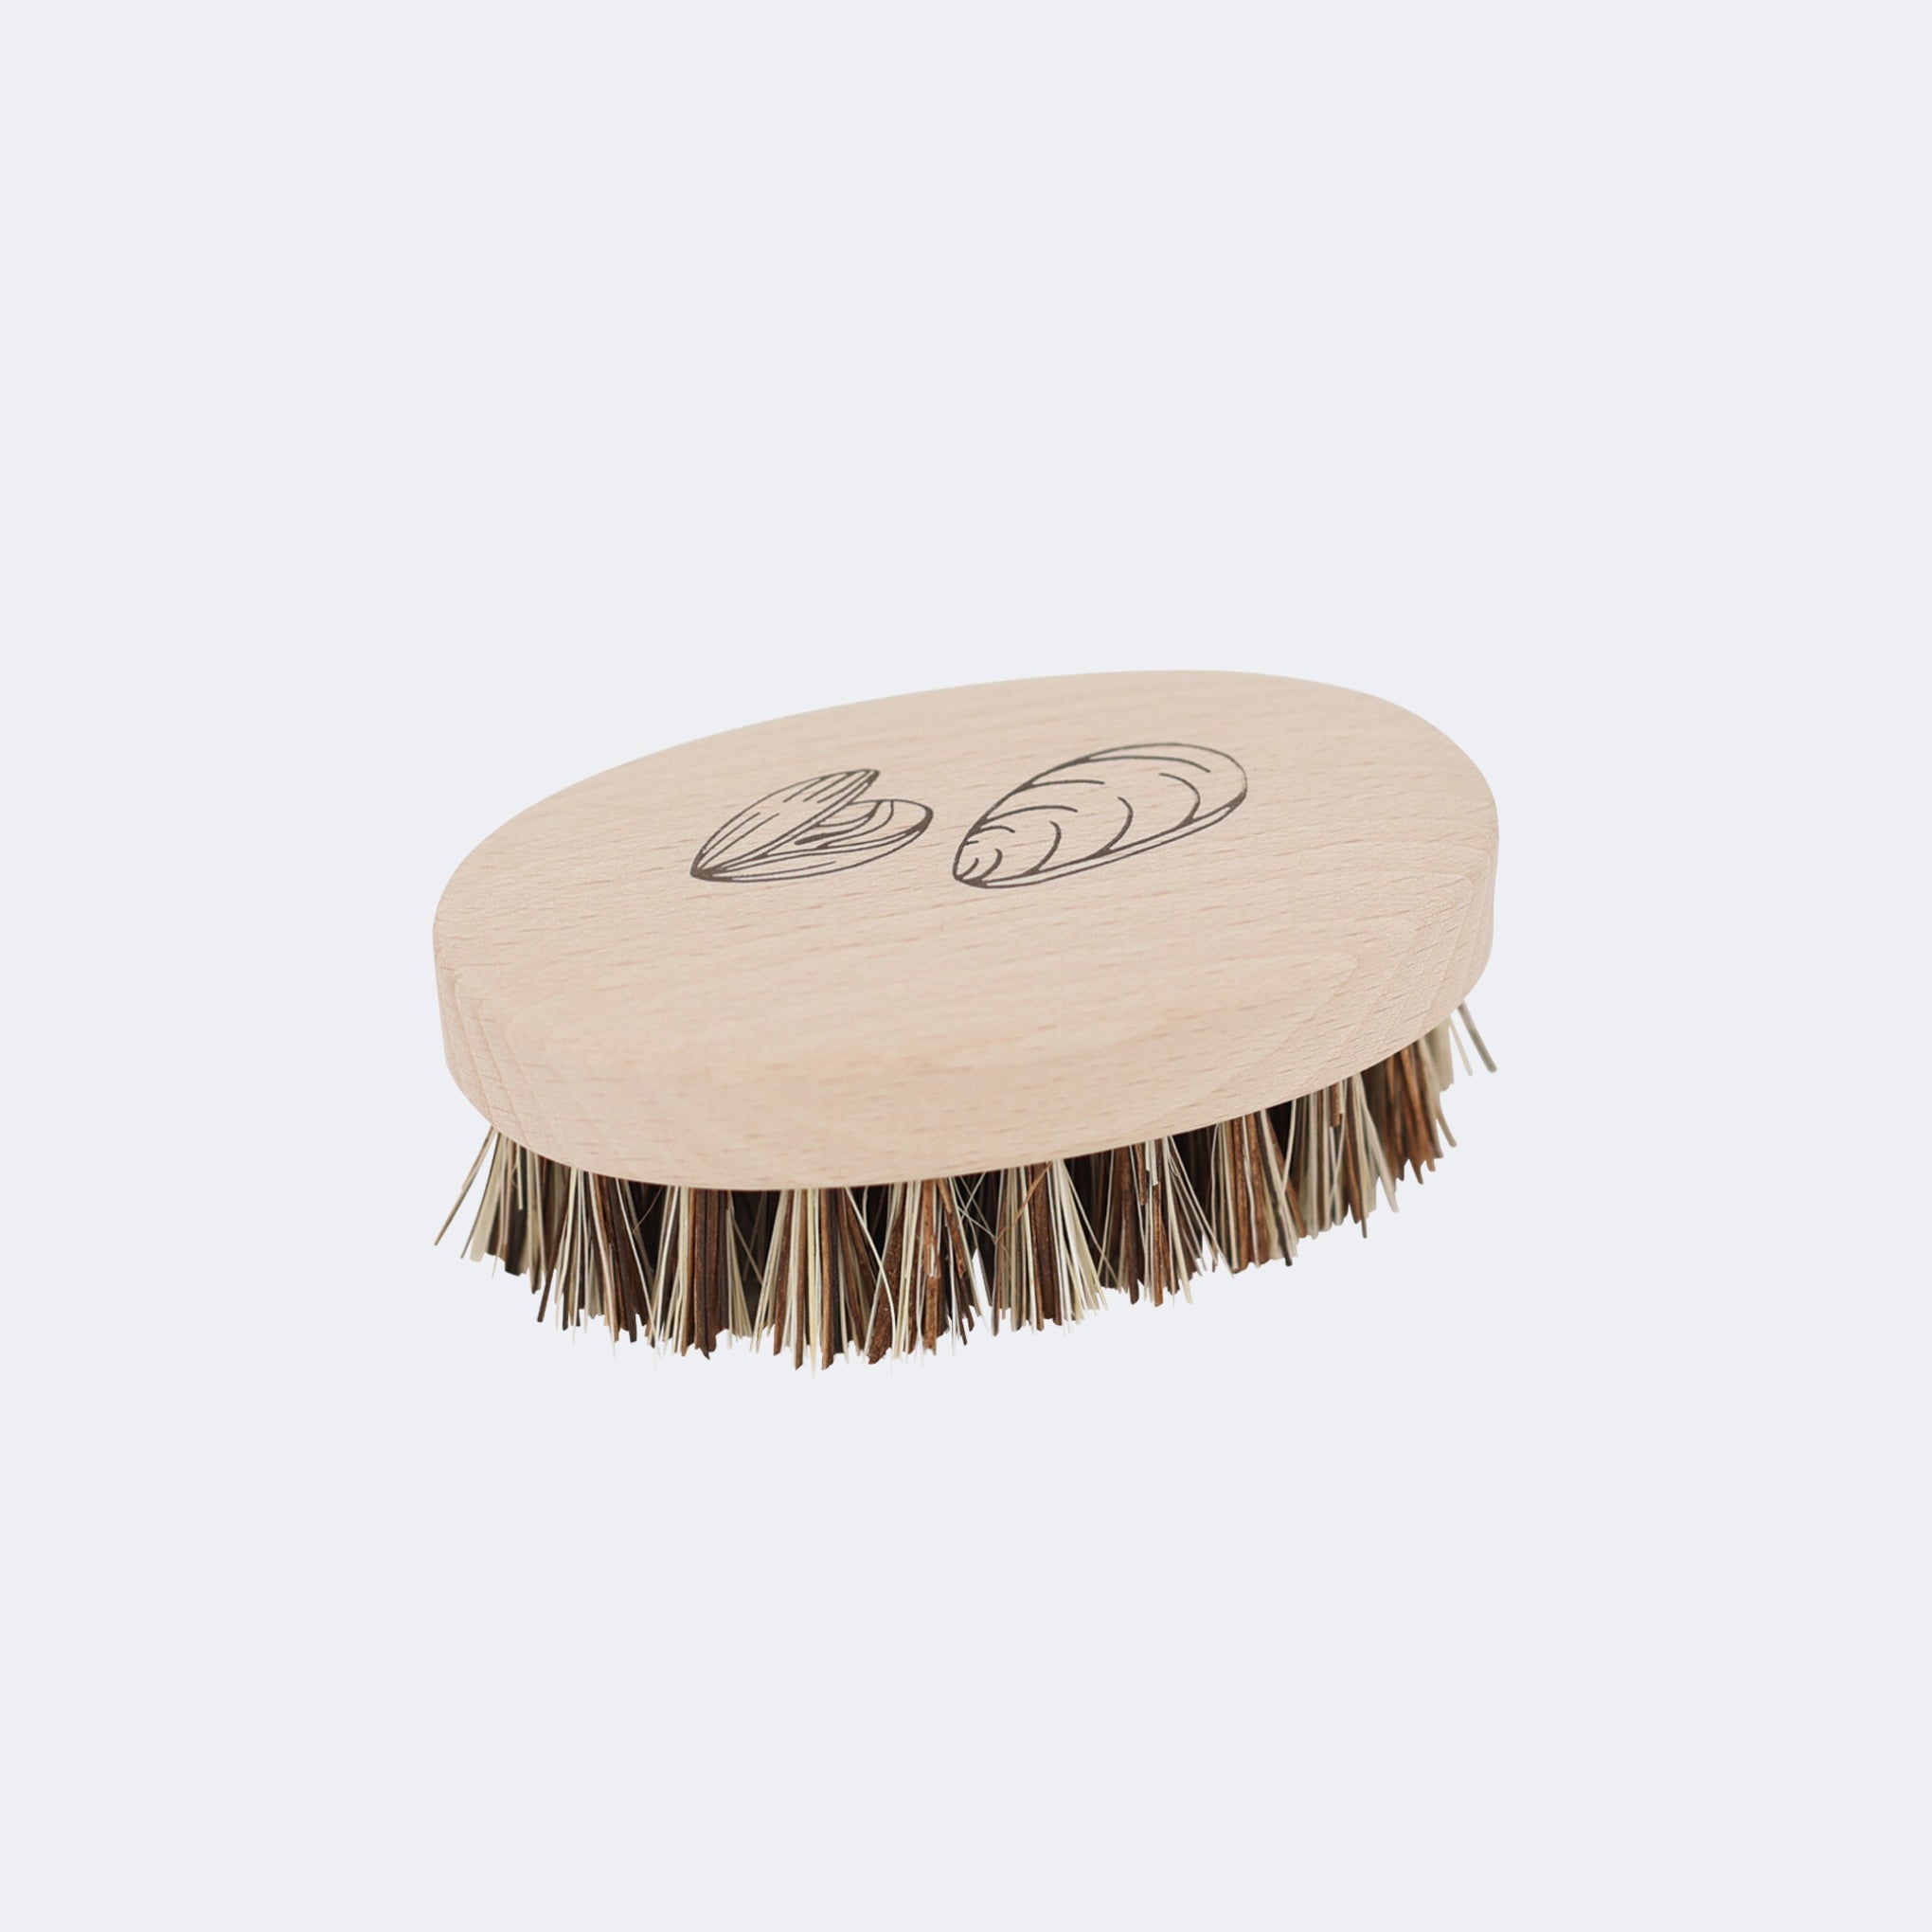 Redecker Mussel & Oyster Cleaning Brush